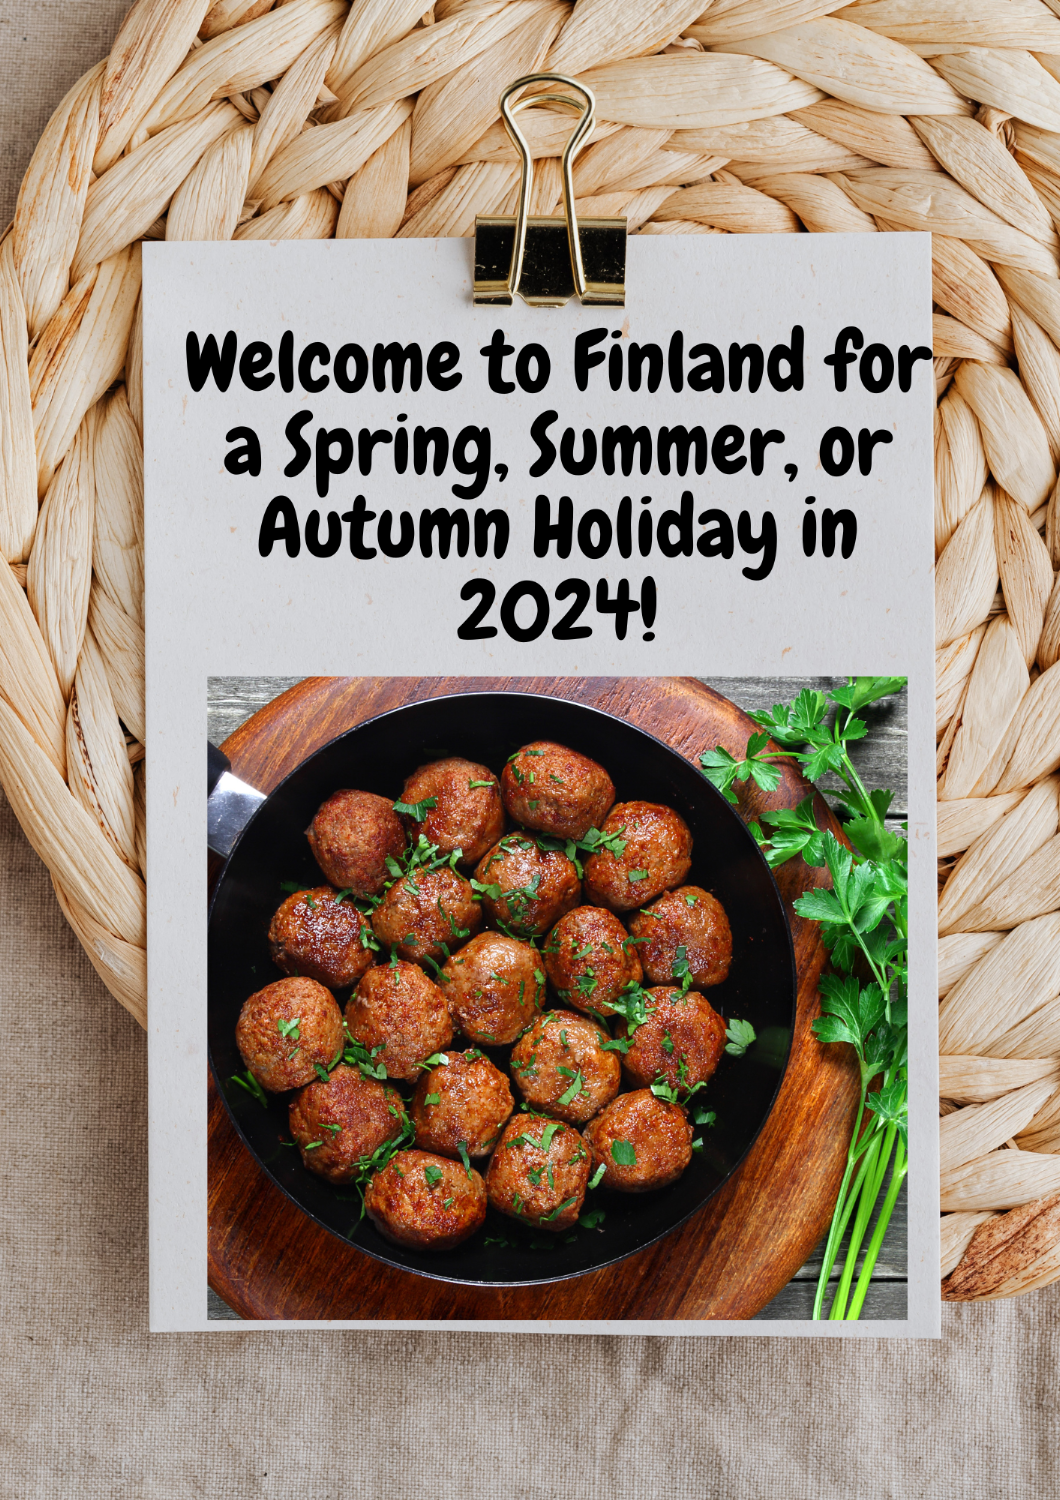 Welcome to Finland for a Spring, Summer, or Autumn Holiday in 2024!